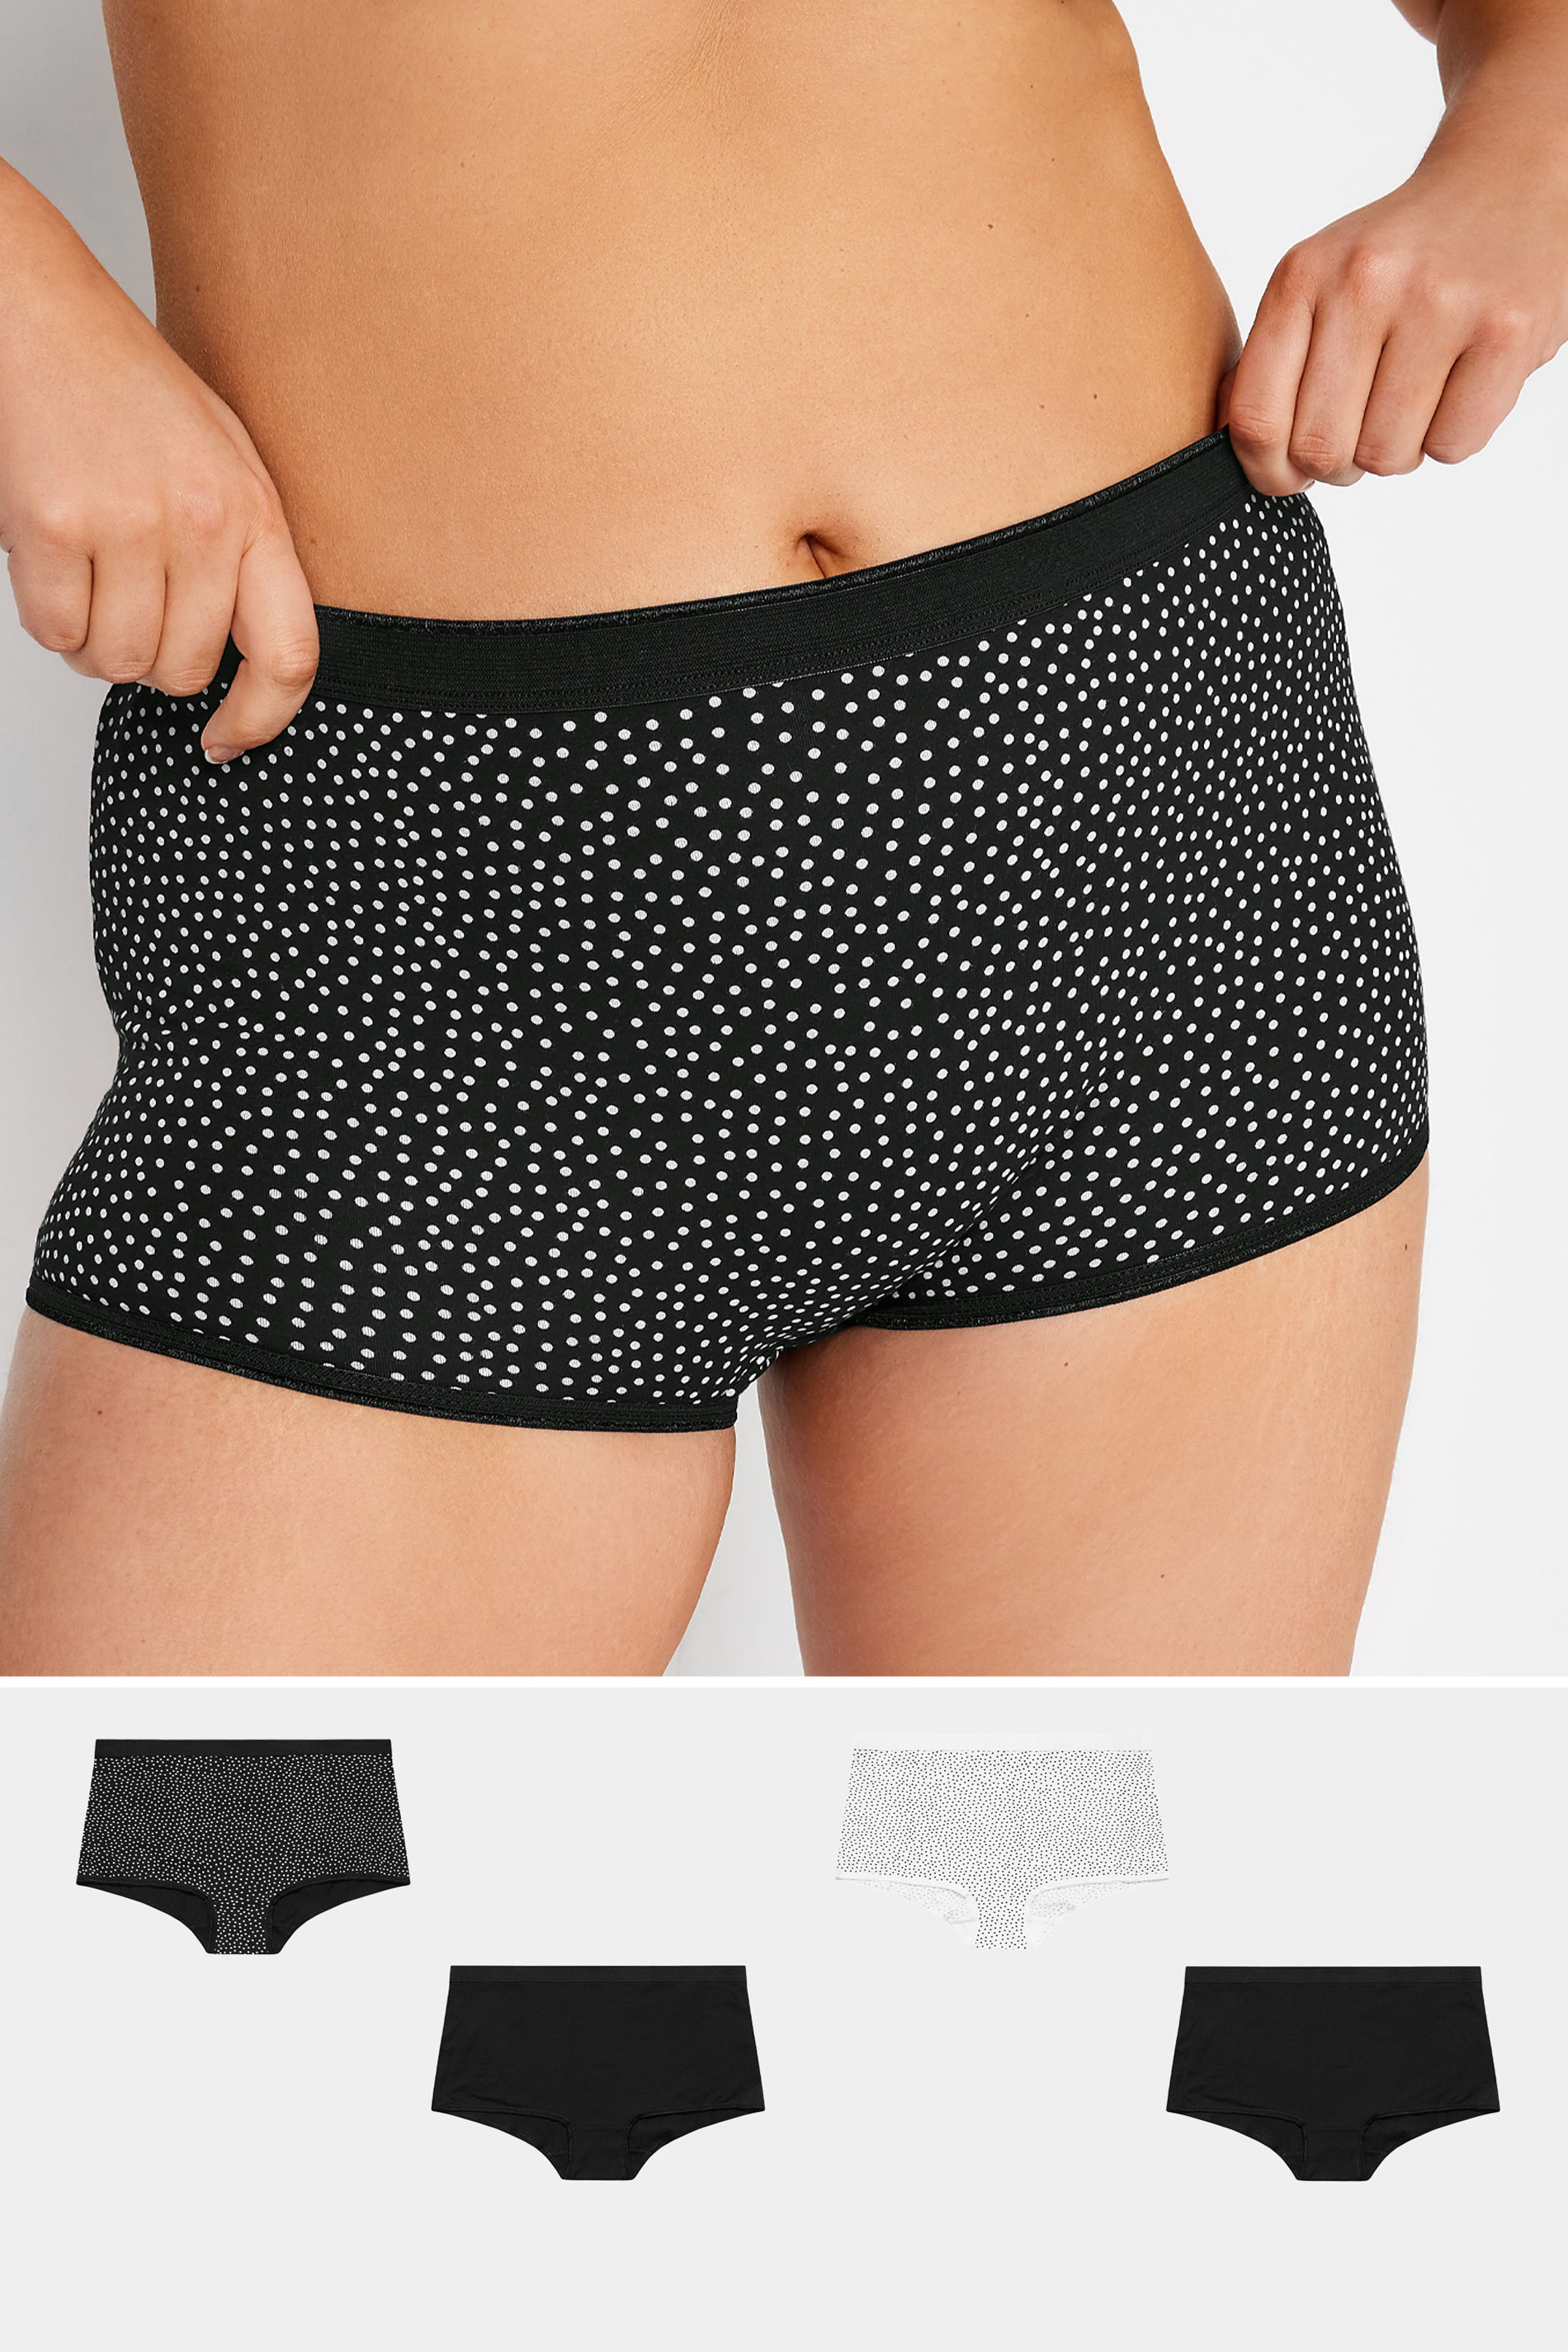 YOURS 4 PACK Plus Size Black Spot Print Cotton Stretch Shorts | Yours Clothing 1